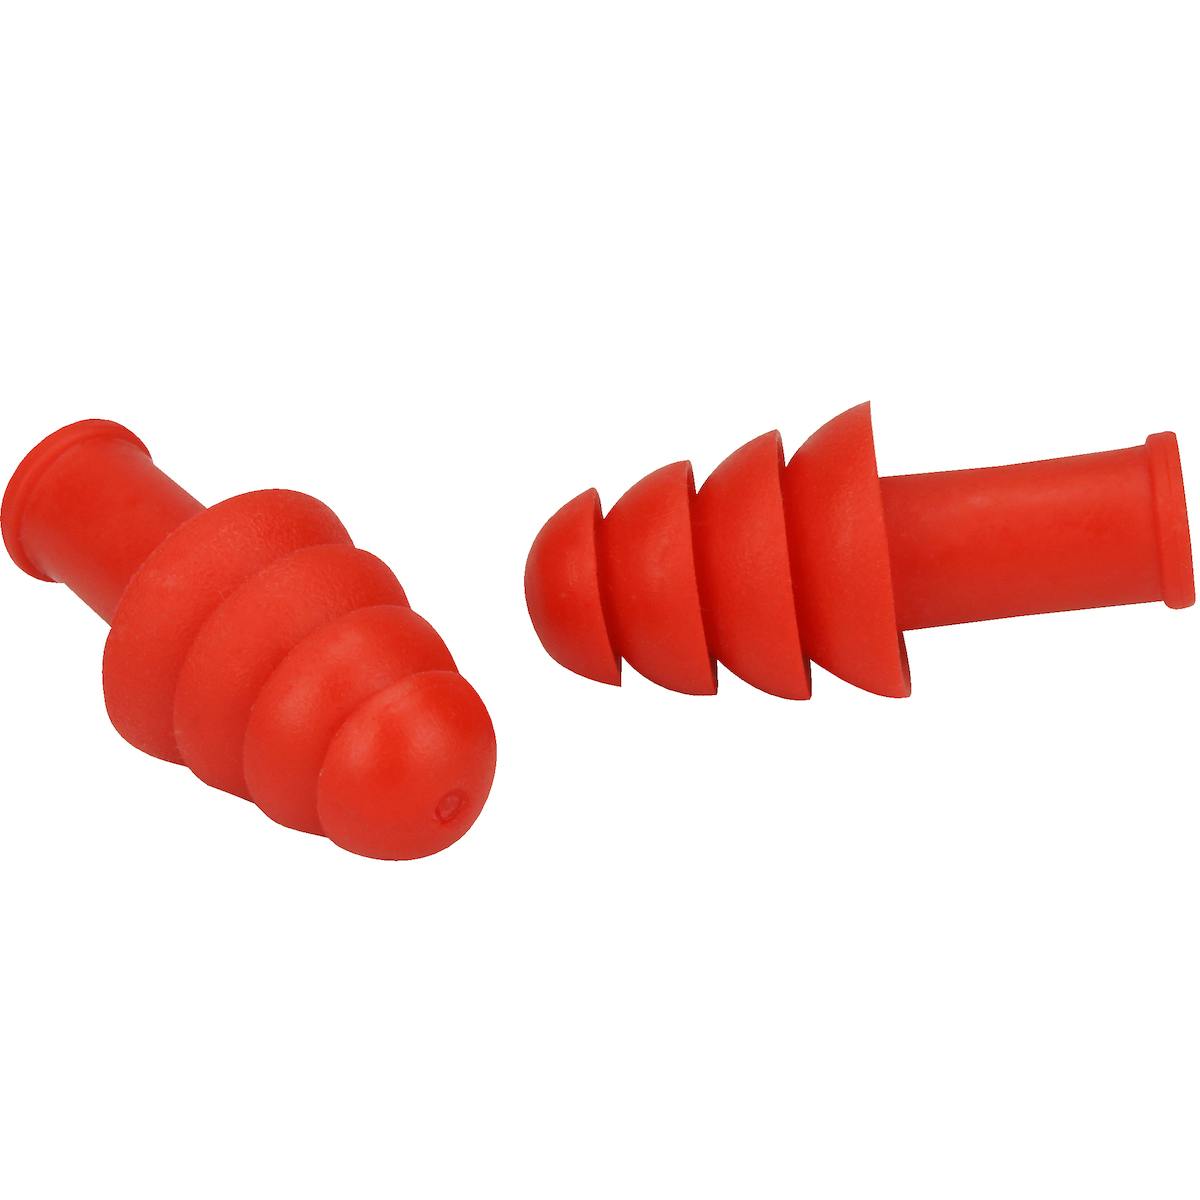 Reusable TPR Ear Plugs - NRR 27, Red (267-HPR410) - OS_0